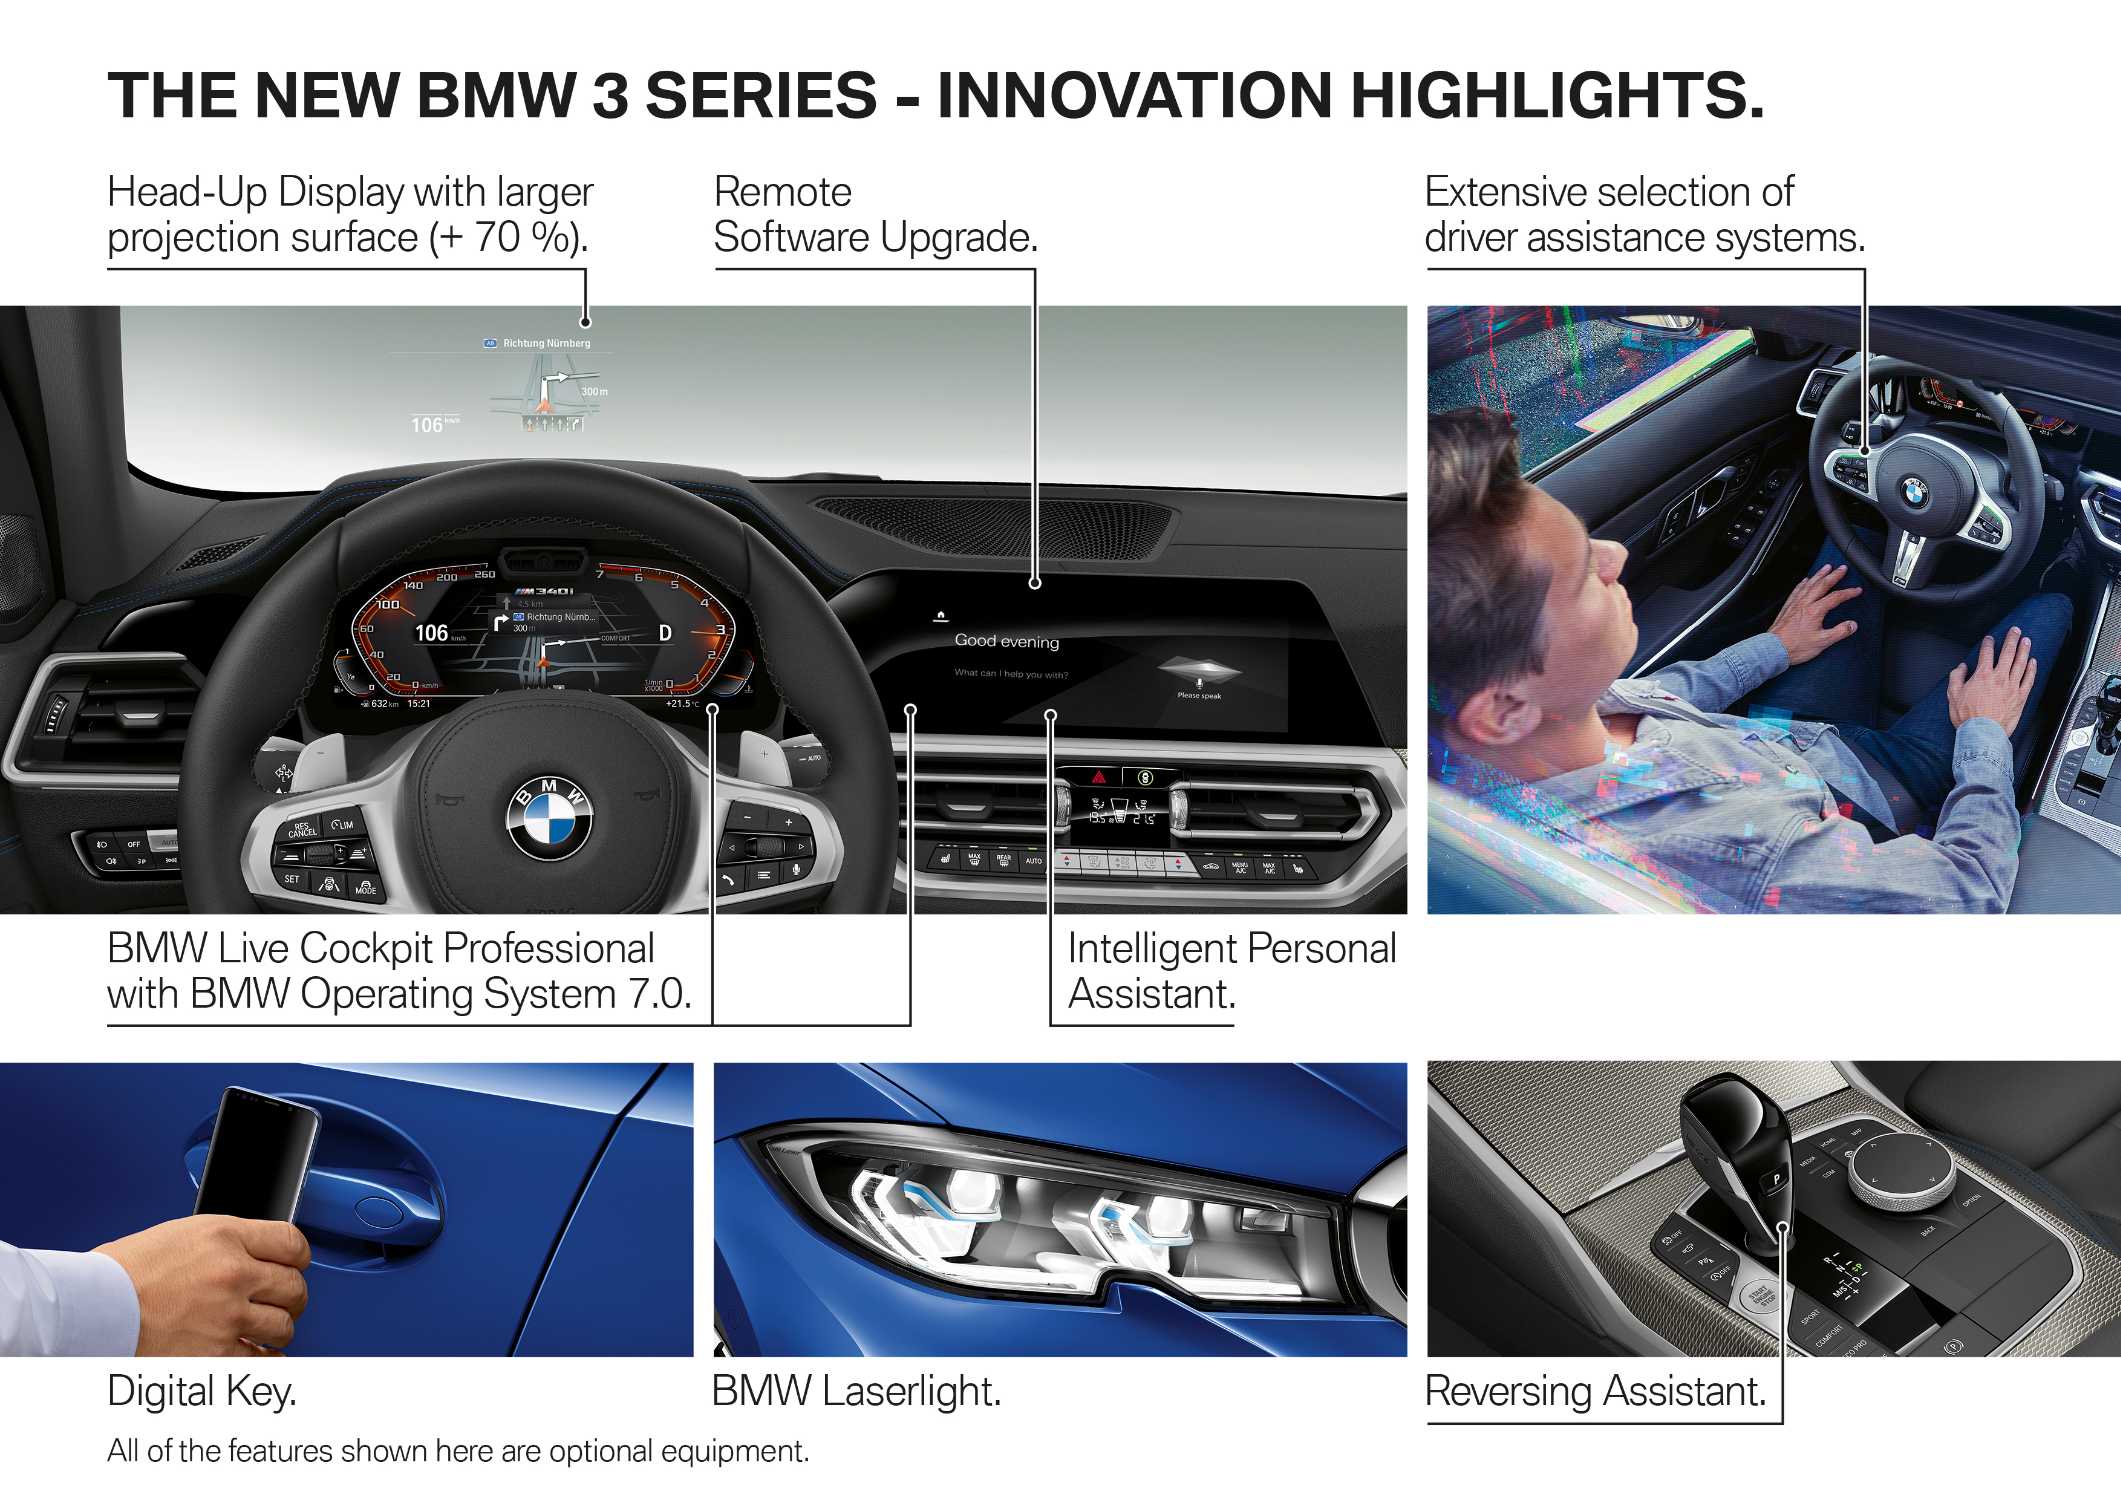 The all-new BMW 3 Series Sedan - Product highlights (10/2018).